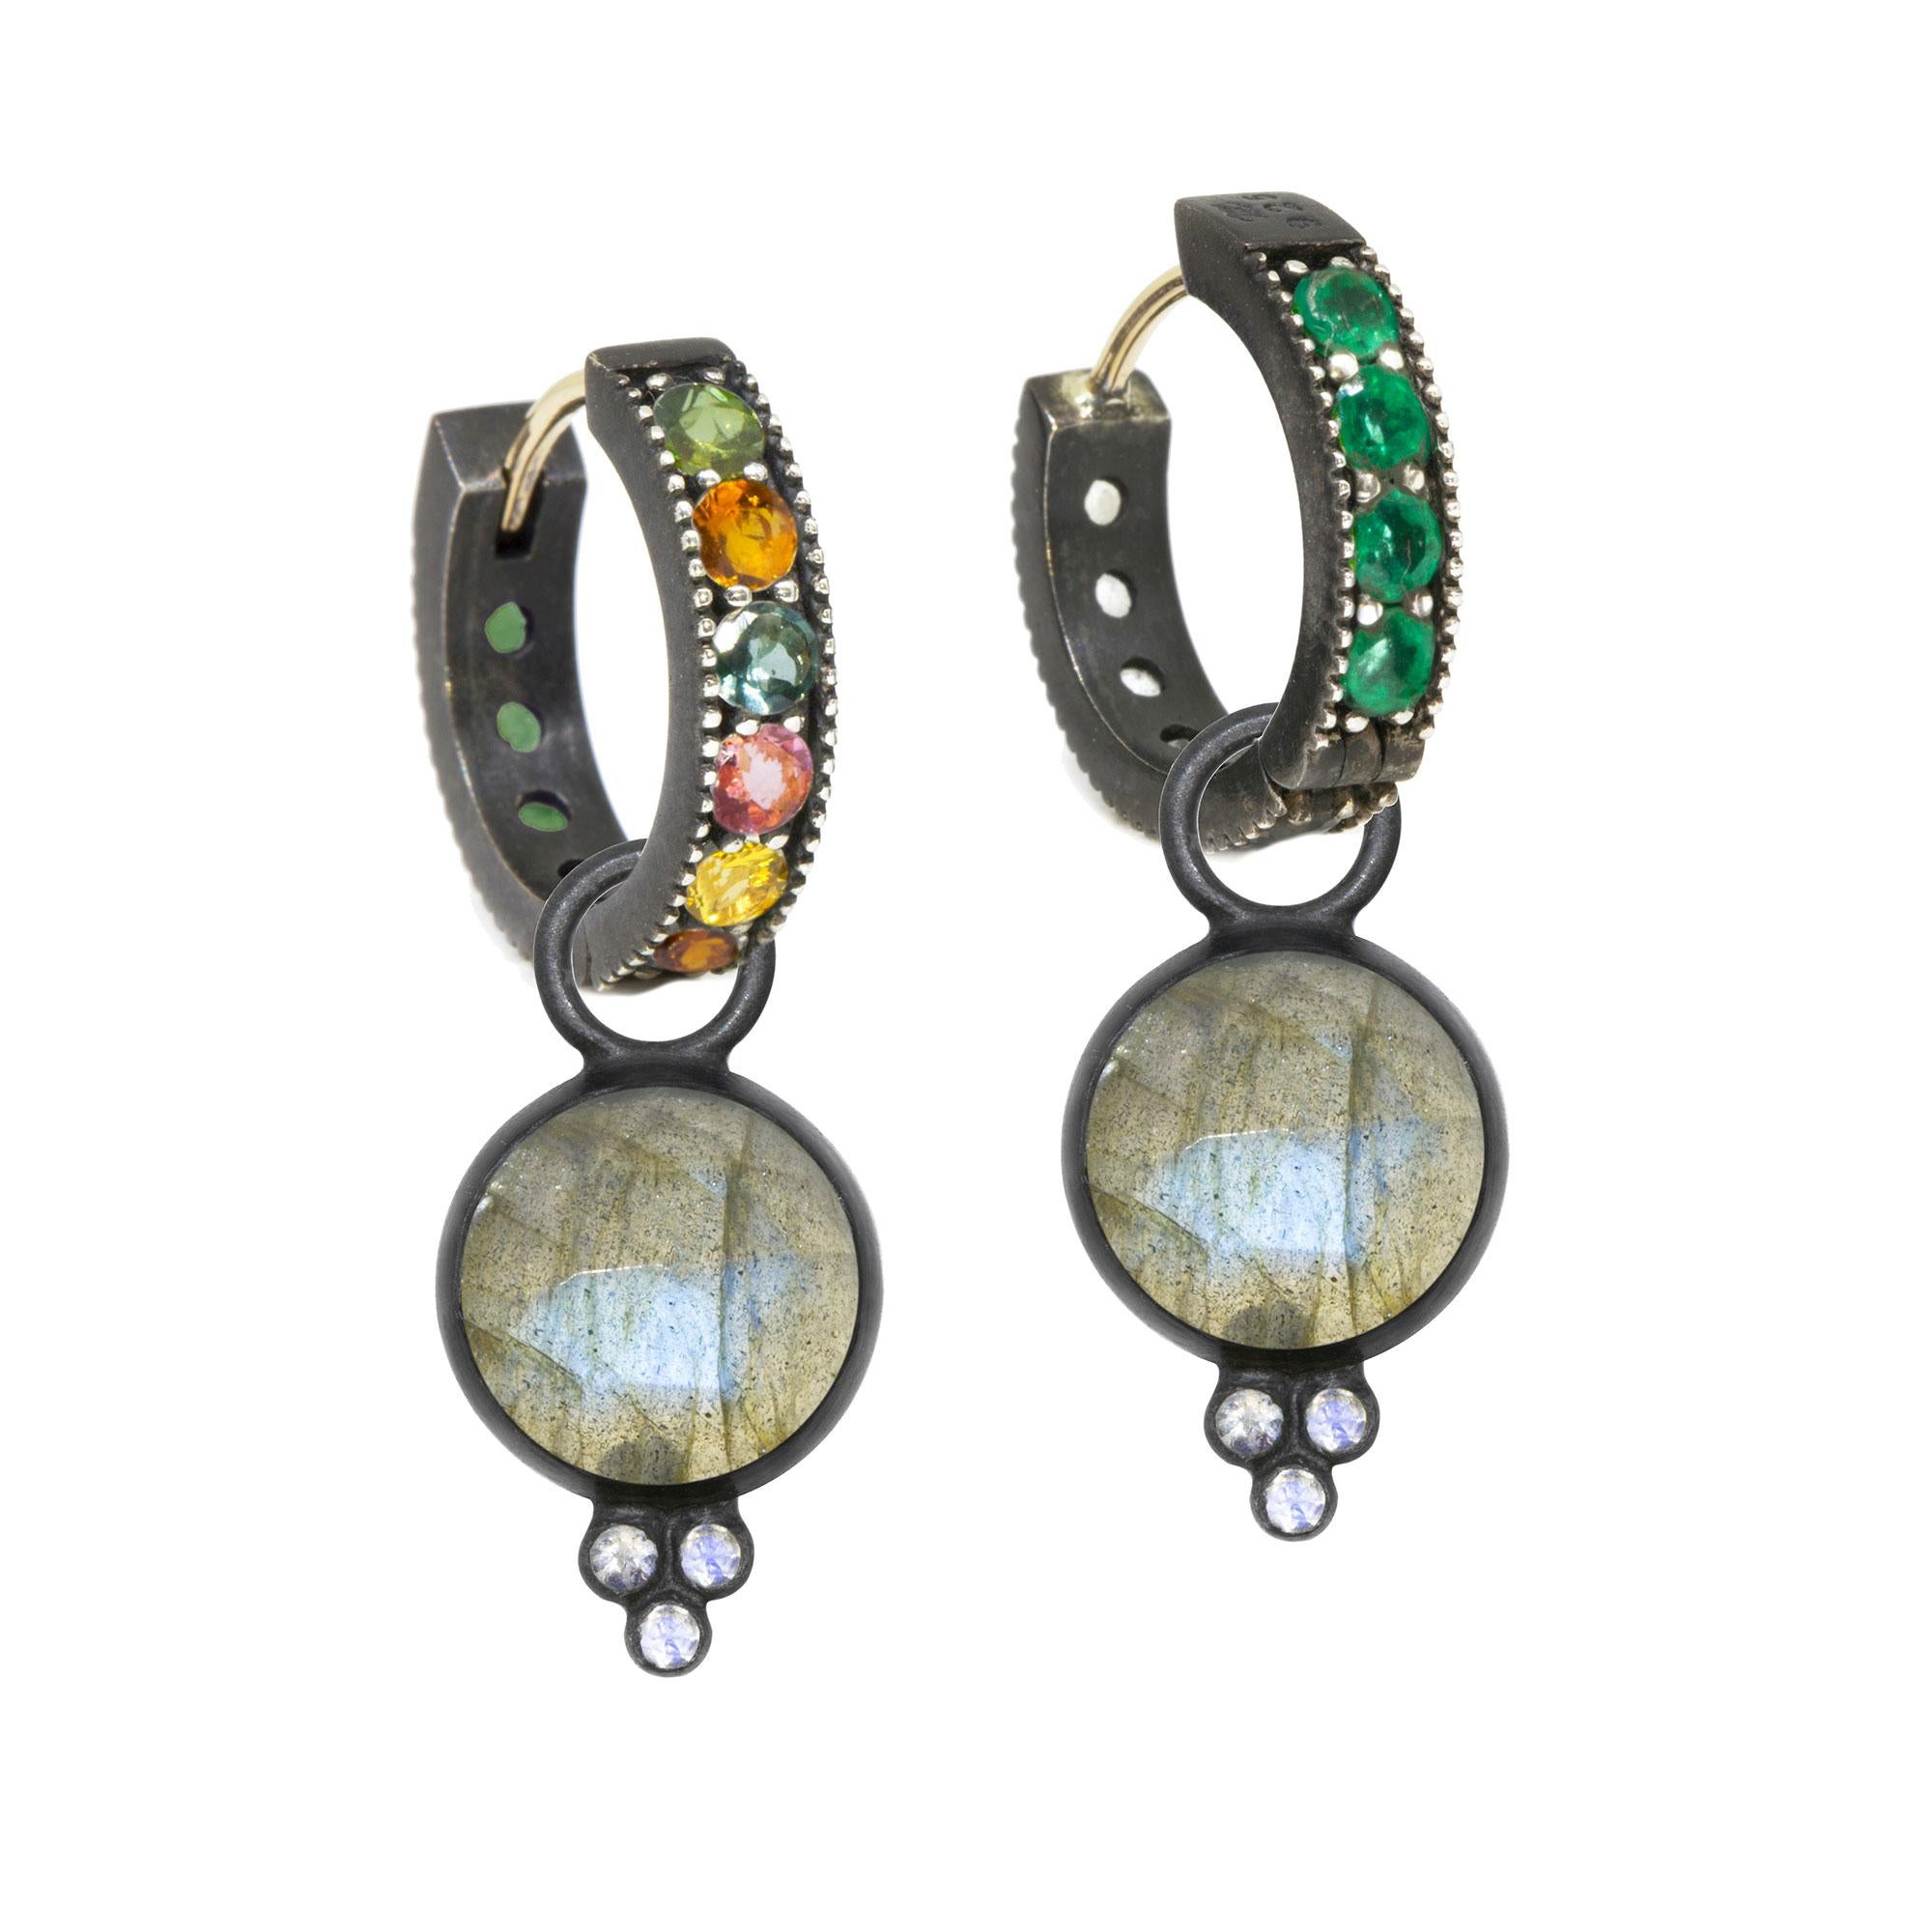 A Nina Nguyen classic to collect and treasure: Our diamond-accented Chloe Oxidized Charms are designed with faceted labradorite rimmed in blackened silver. They pair with any of our hoops and mix well with other styles.

Nina Nguyen Design's